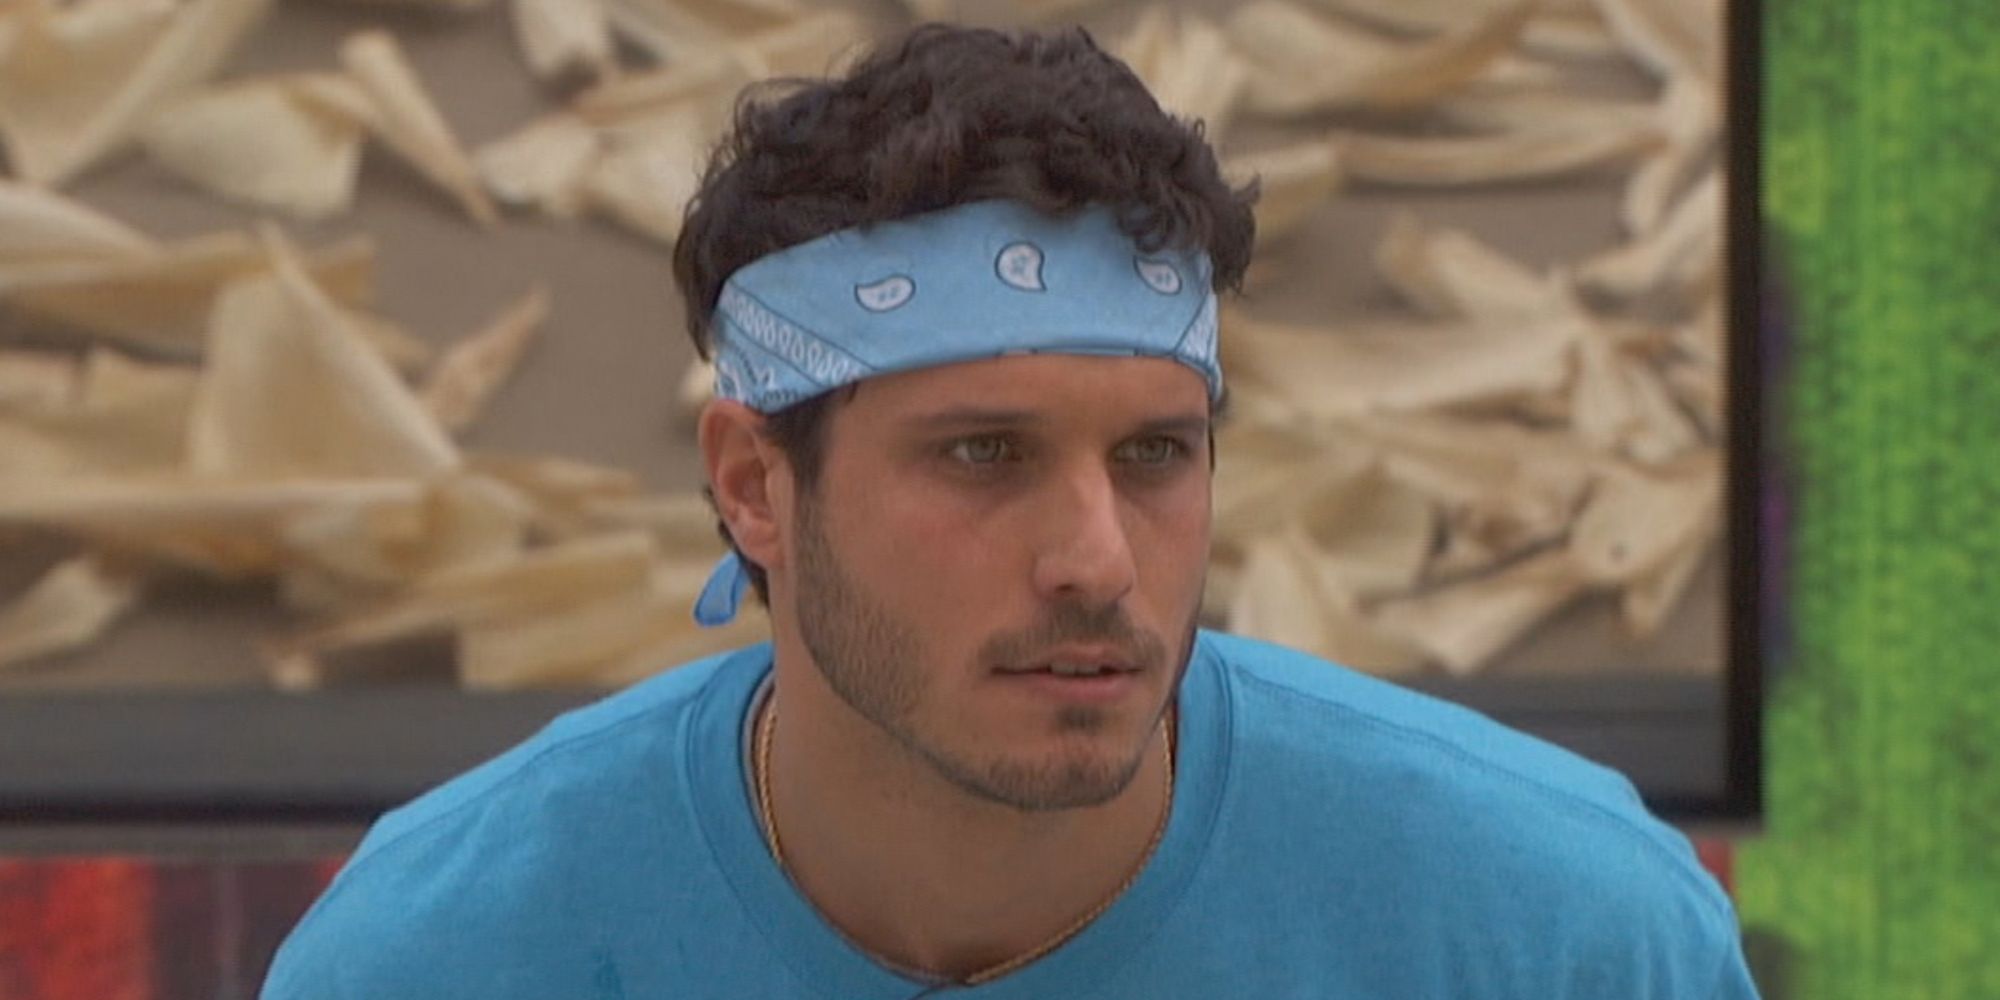 Cody during the POV competition on Big Brother, wearing a blue bandana and shirt